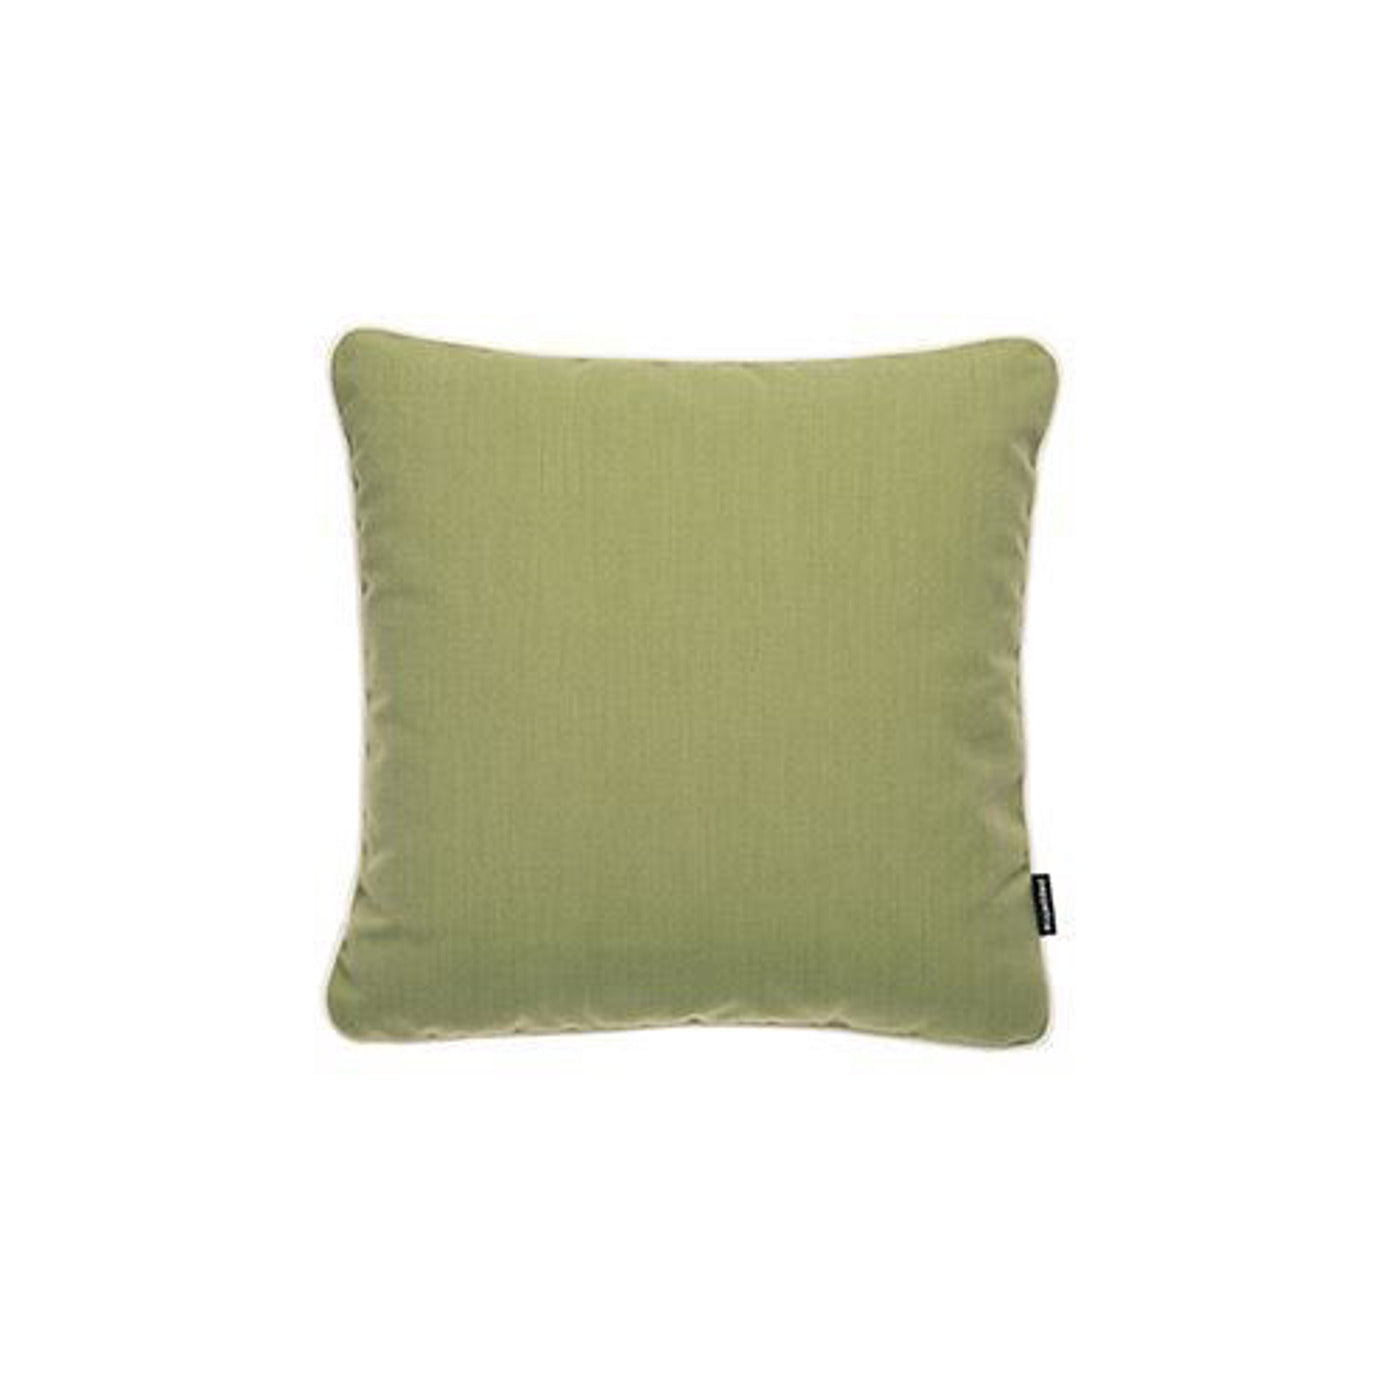 Pappelina Cushion / pillow for indoor and outdoor use SUNNY Olive